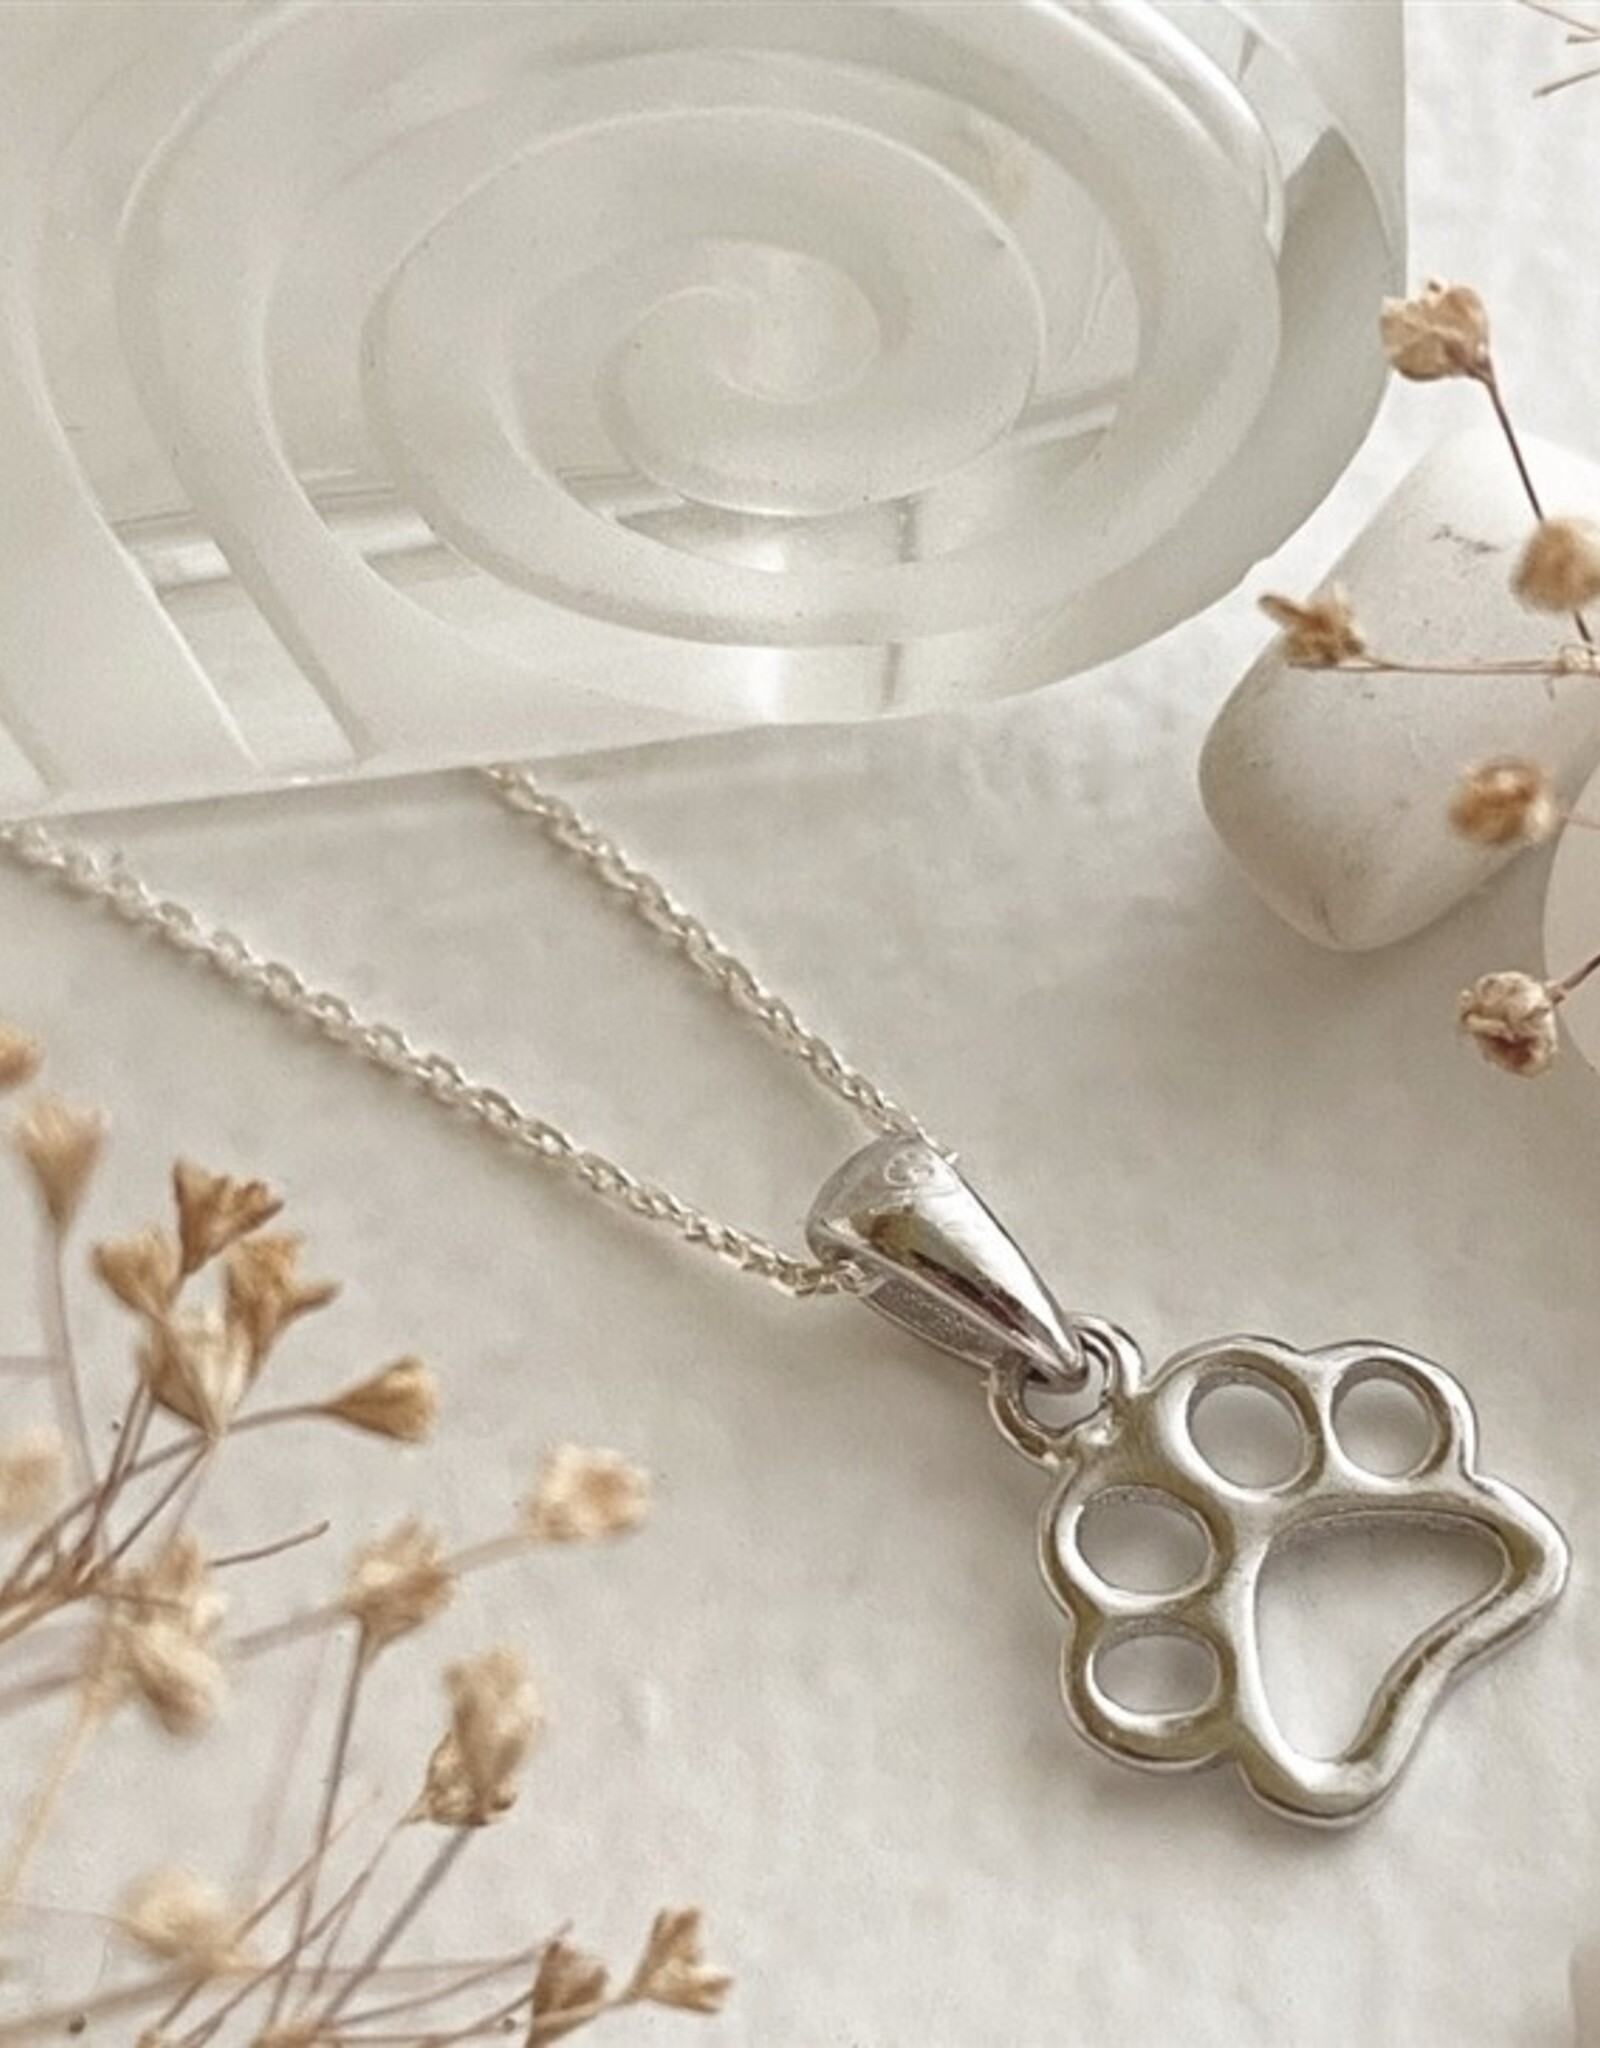 "Paws" Paw Print Pendant Necklace in Sterling Silver